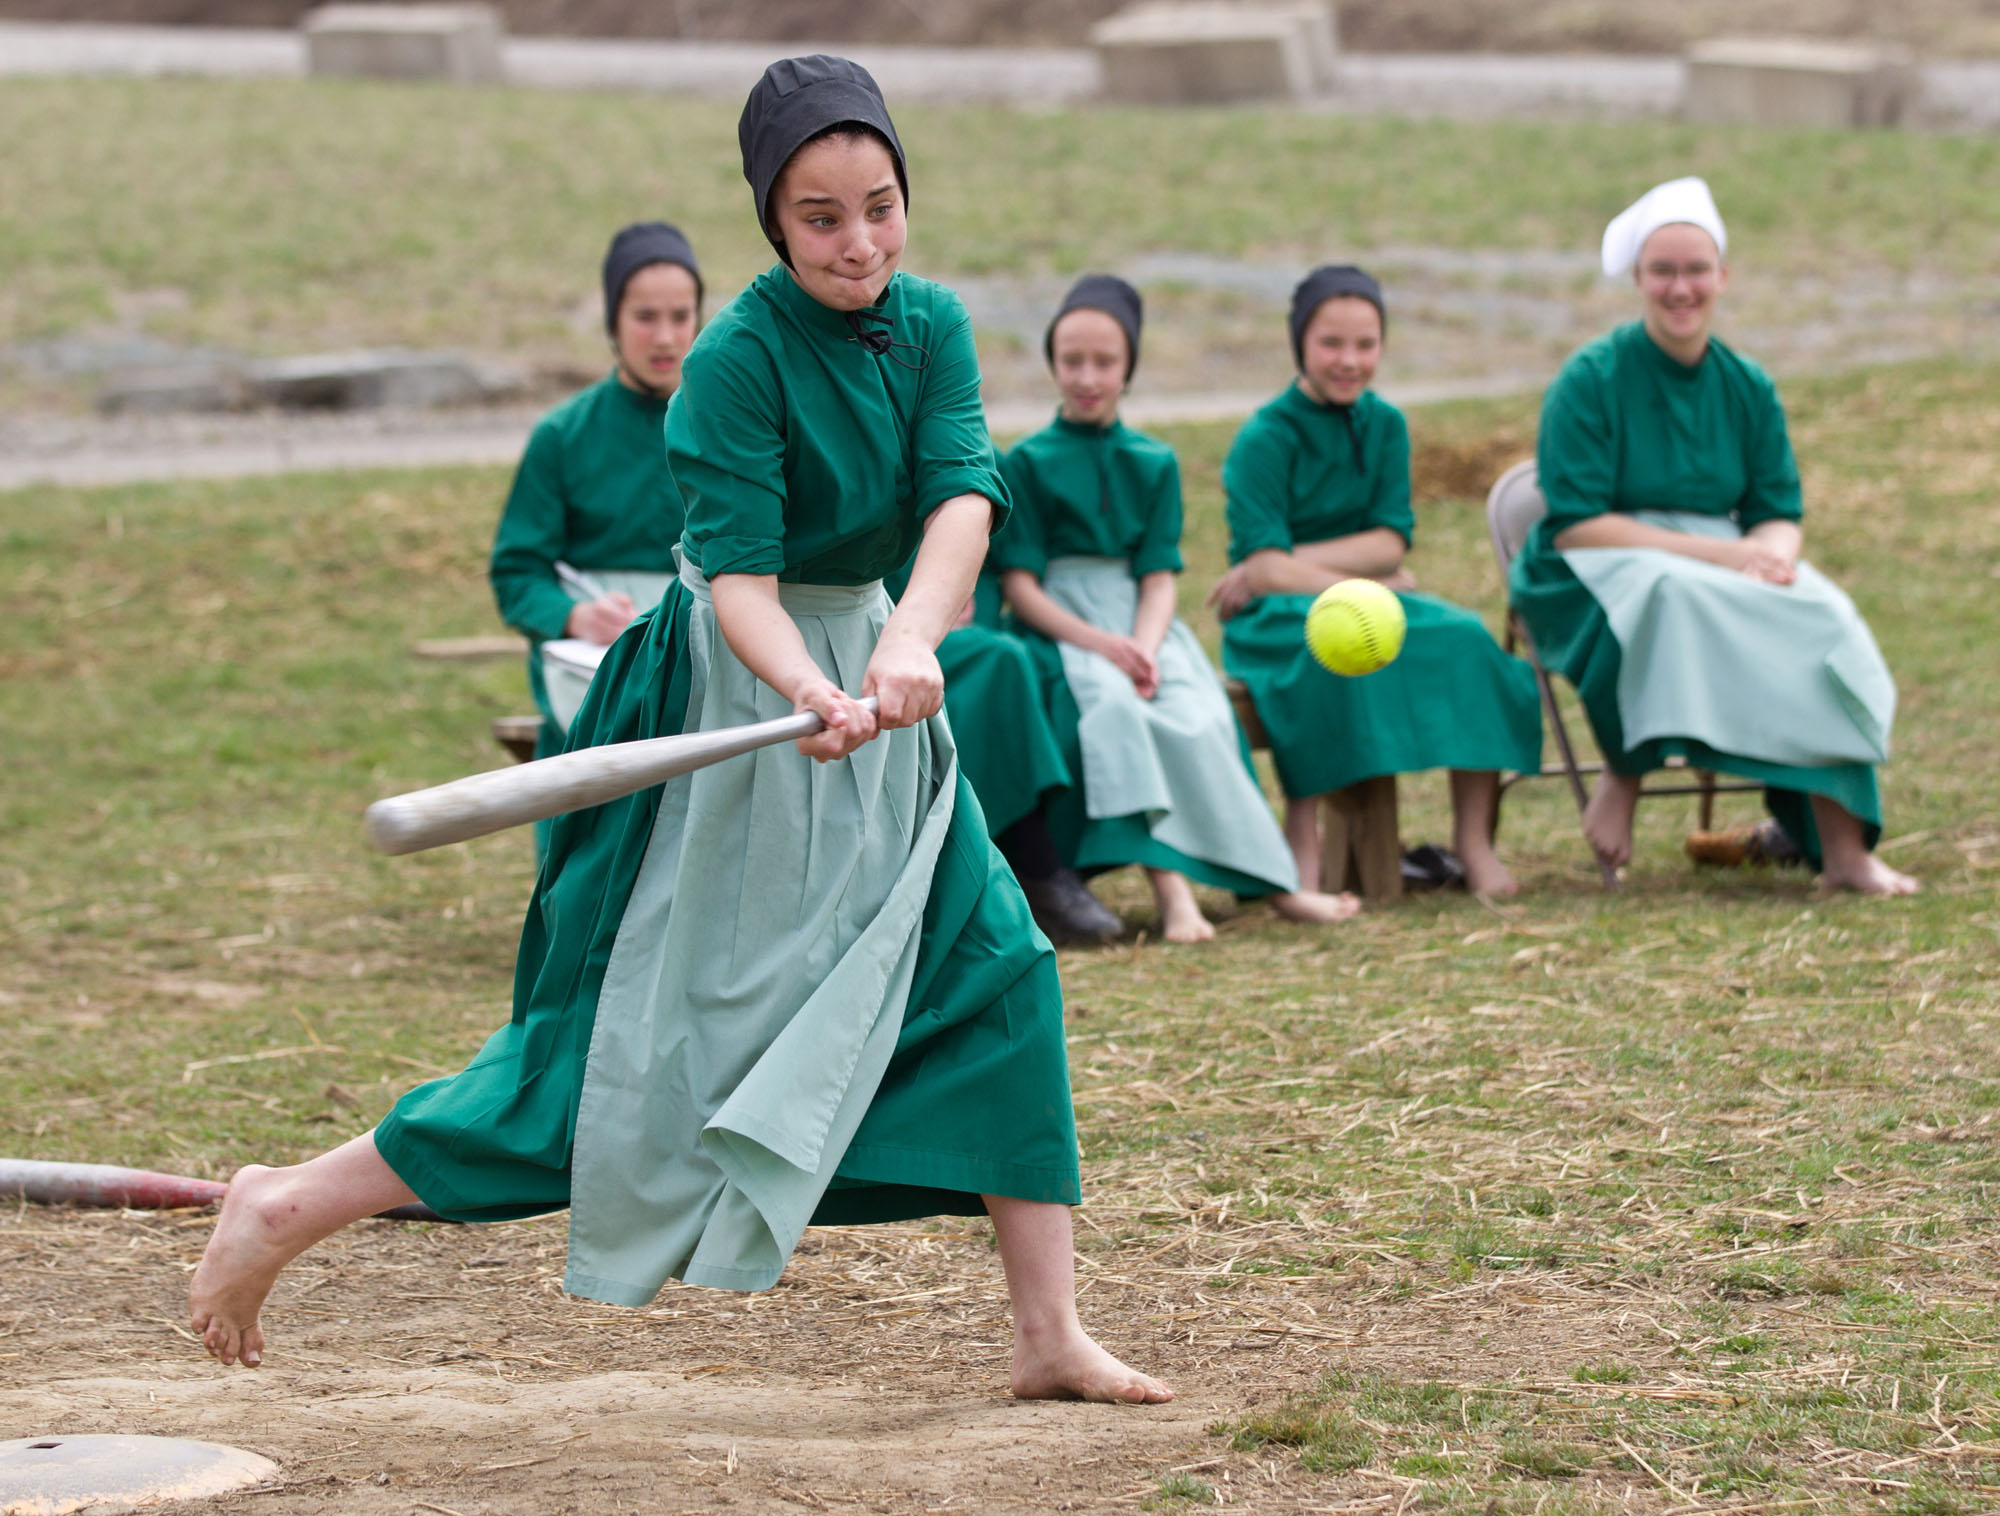 Amish girls play softball after class during an end of the school year celebration on Tuesday, April 9, 2013 in Bergholz, Ohio. The celebration was also part of a farewell picnic for those sentenced in the hair and beard cutting scandal earlier in the year. (AP Photo/Scott R. Galvin)